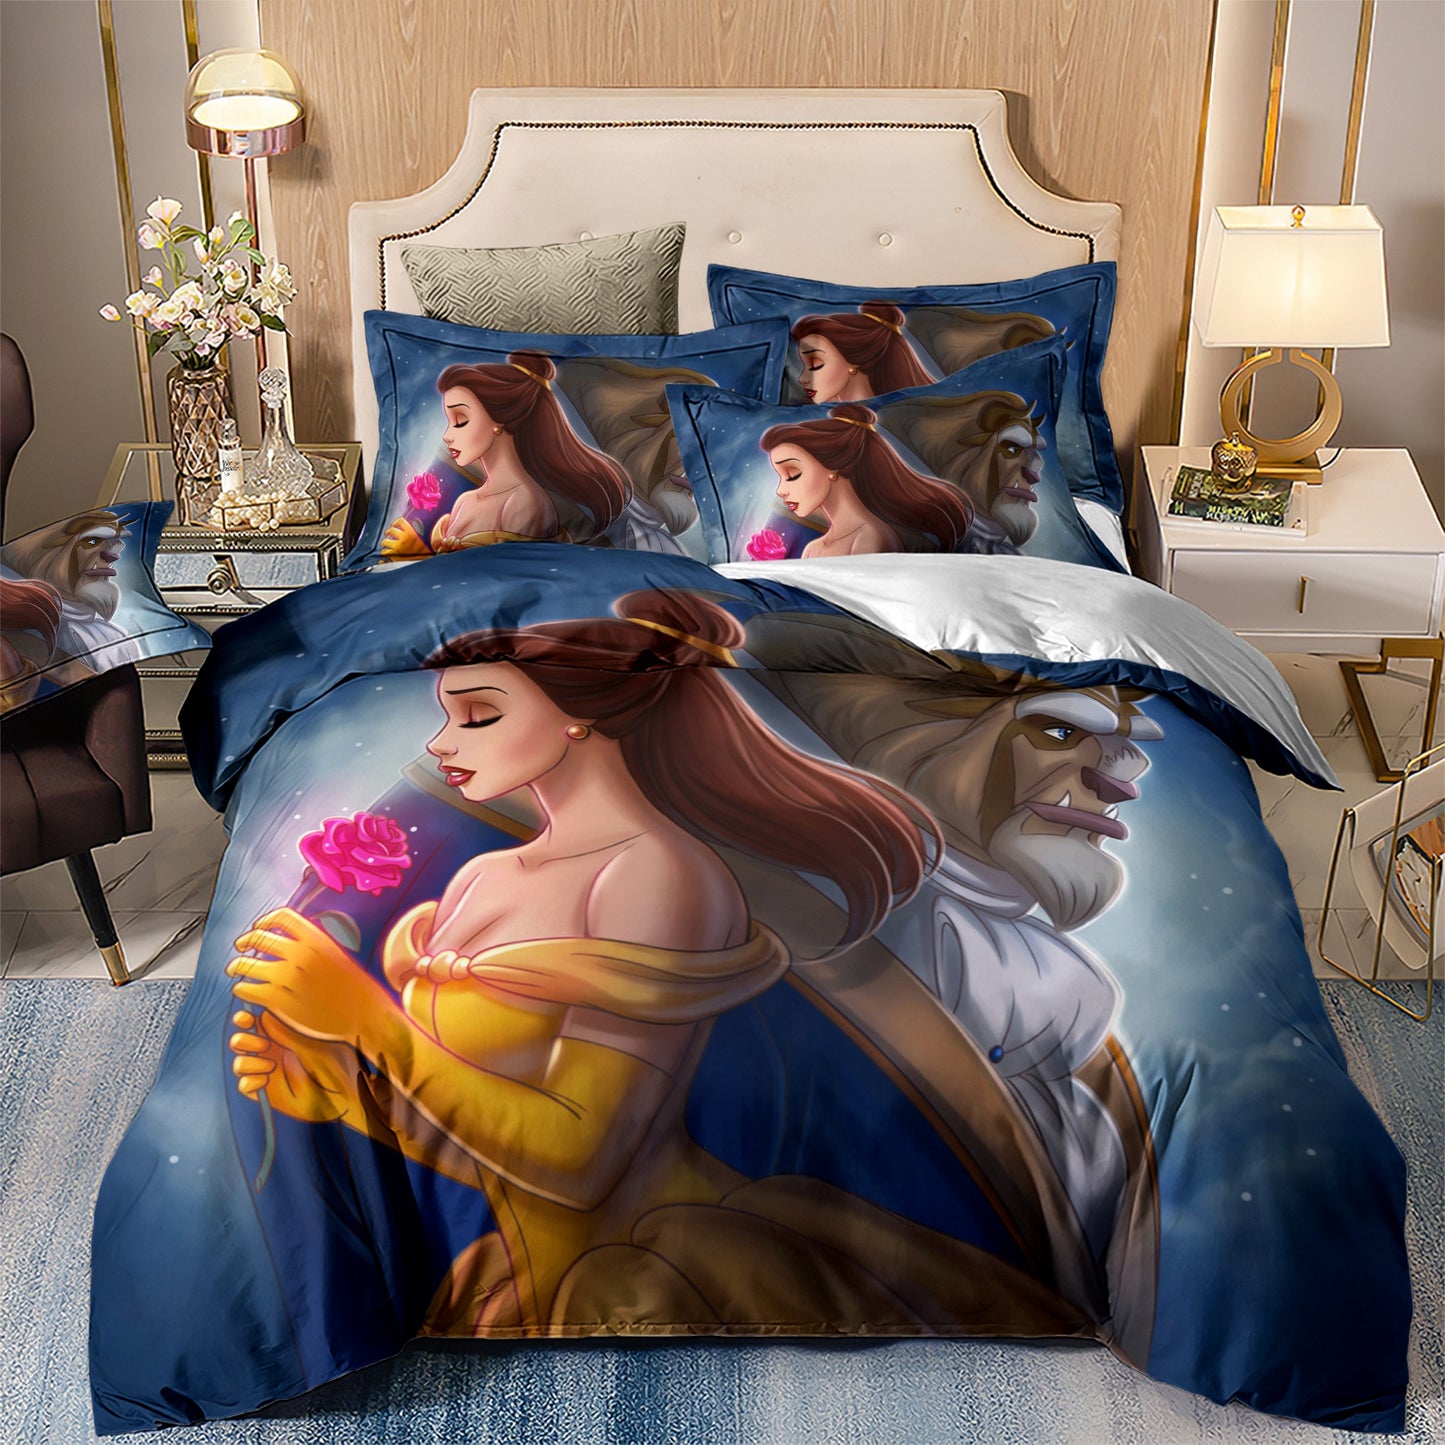 WONGS BEDDING Beauty and the beast Duvet cover set Bedding Bedroom set